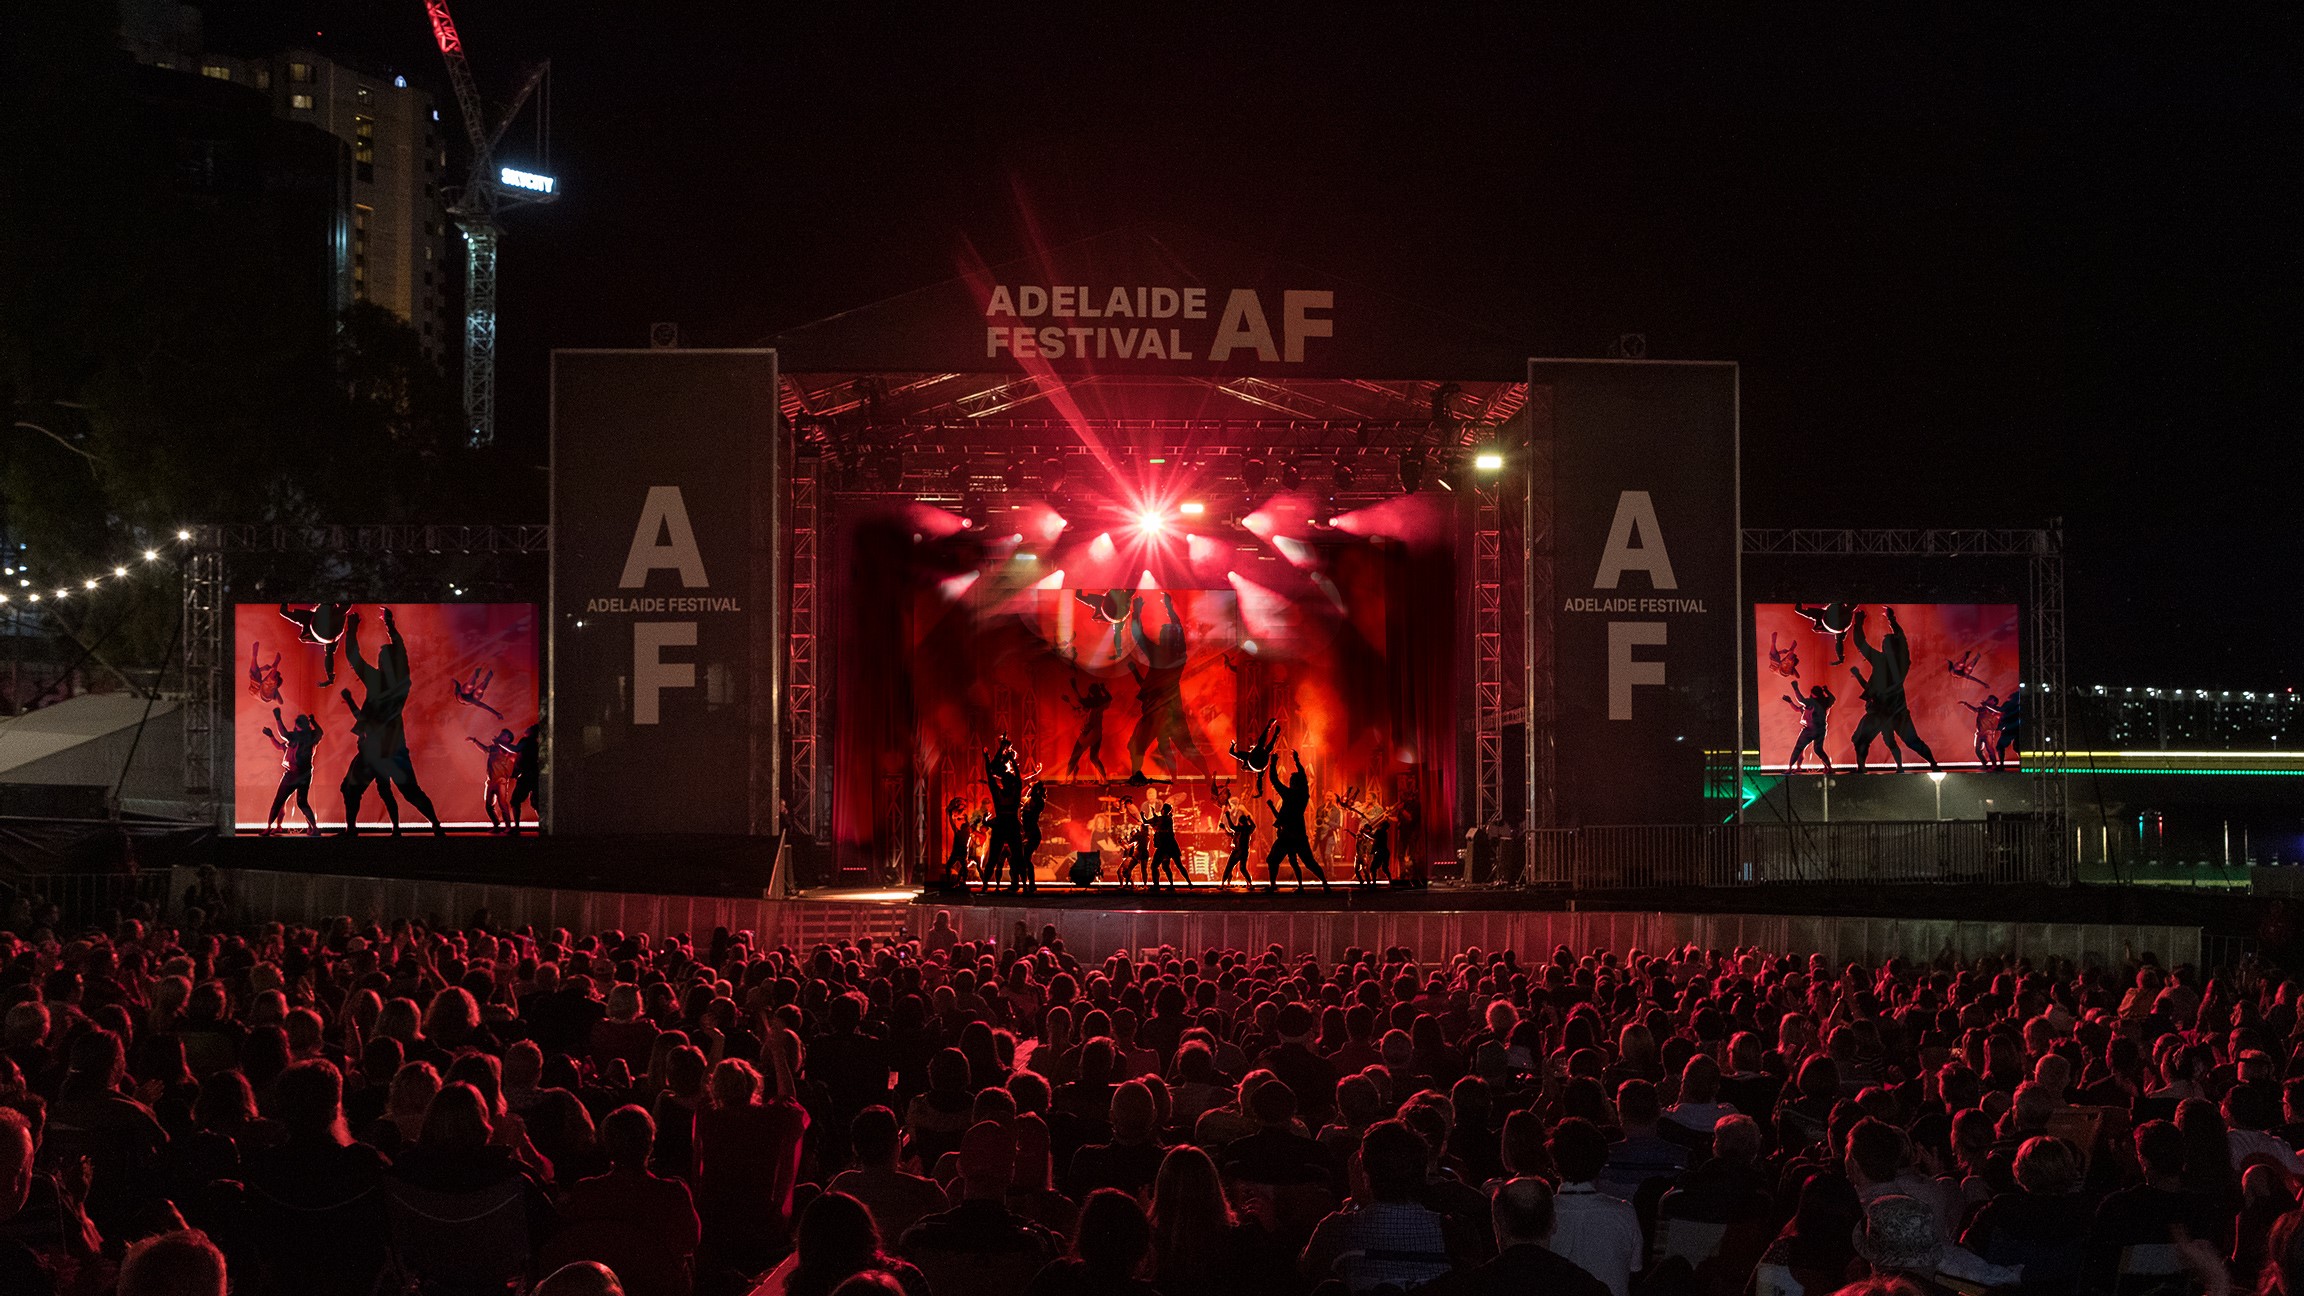 A group of people perform acrobatic moves on a large stage with Adelaide Festival branding in front of a large crowd.